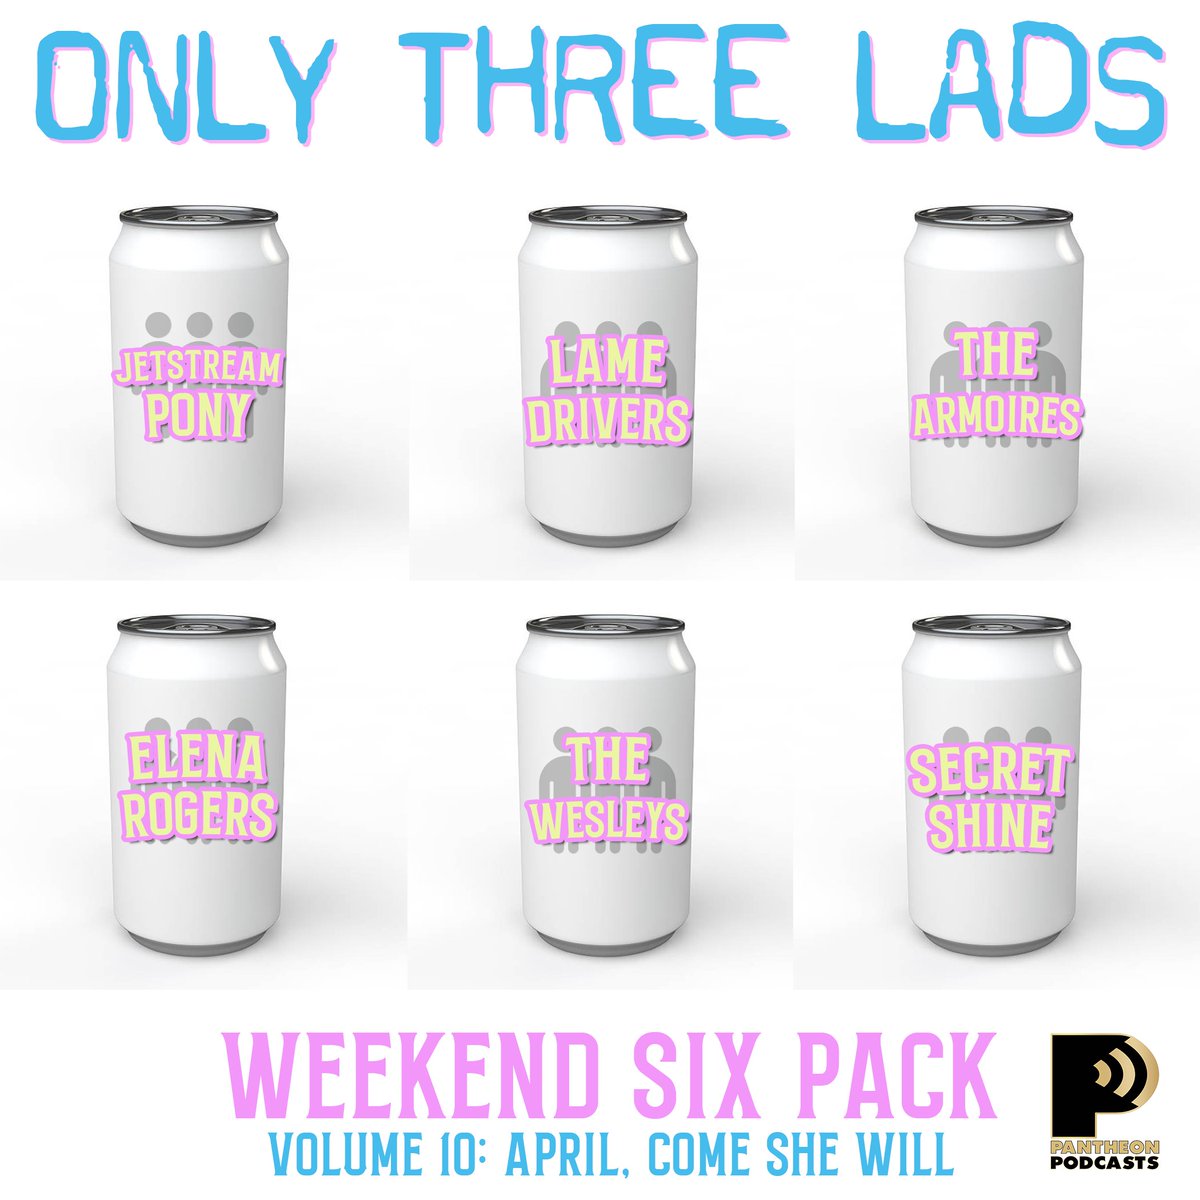 New bonus #weekend6pack episode out now wherever you get pods or linktr.ee/onlythreelads .  Feat #bestnewmusic by @jetstream_pony, @lamedrivers, @TheArmoires, @elenamrogers, The Wesleys & @SecretShineUK.  @PantheonPods  @StirBig @SkepWax @LTTLVLLG @NoRulesPR @ctpublicity